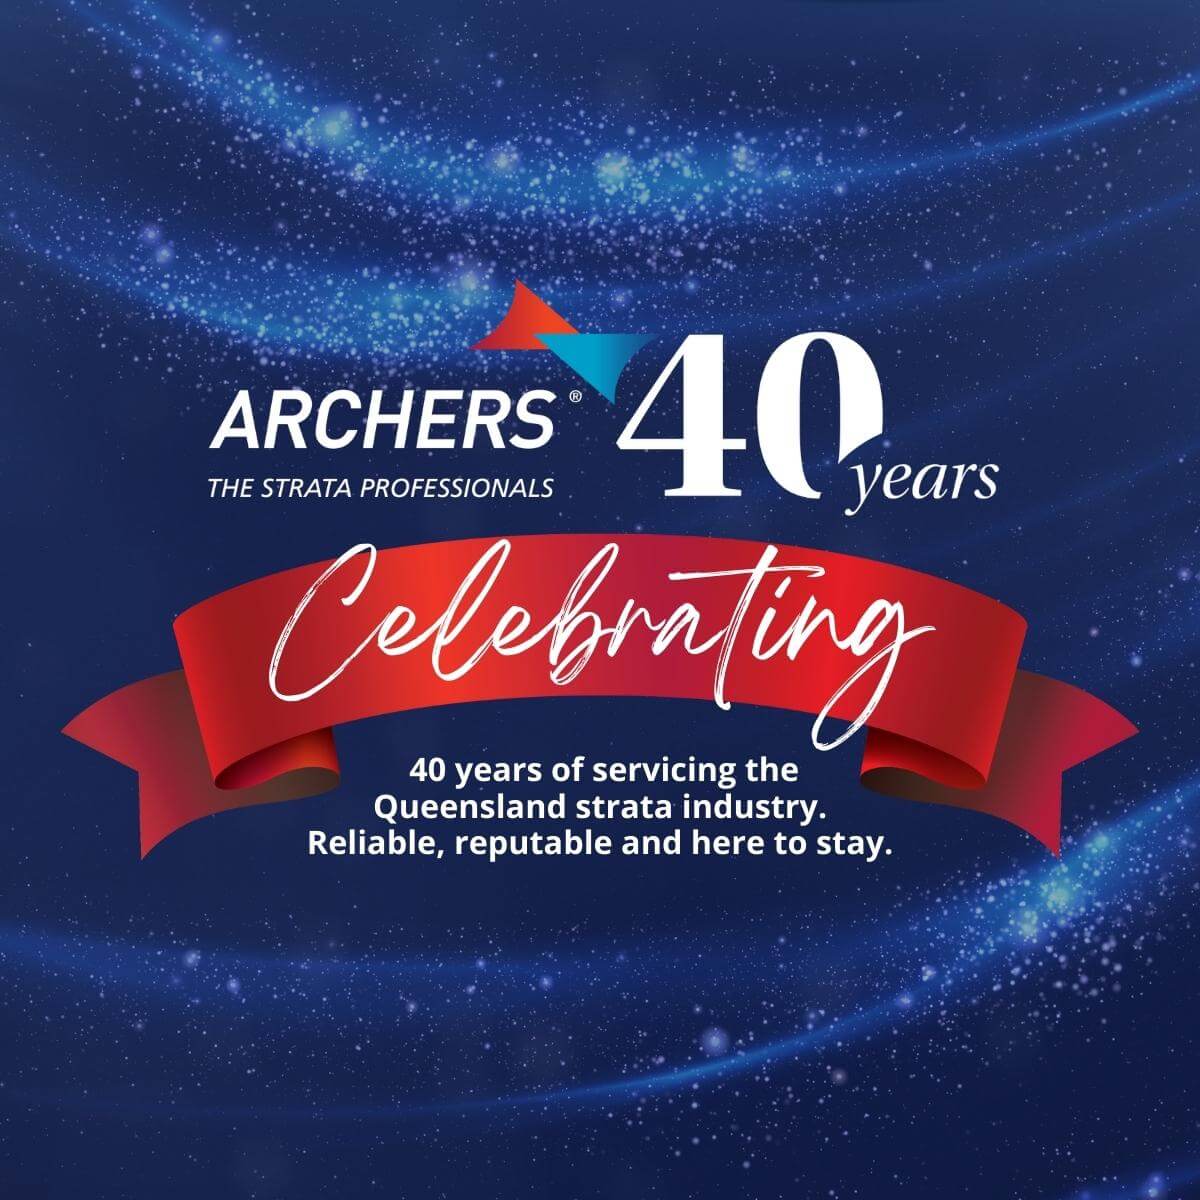 Celebrating 40 years of Archers